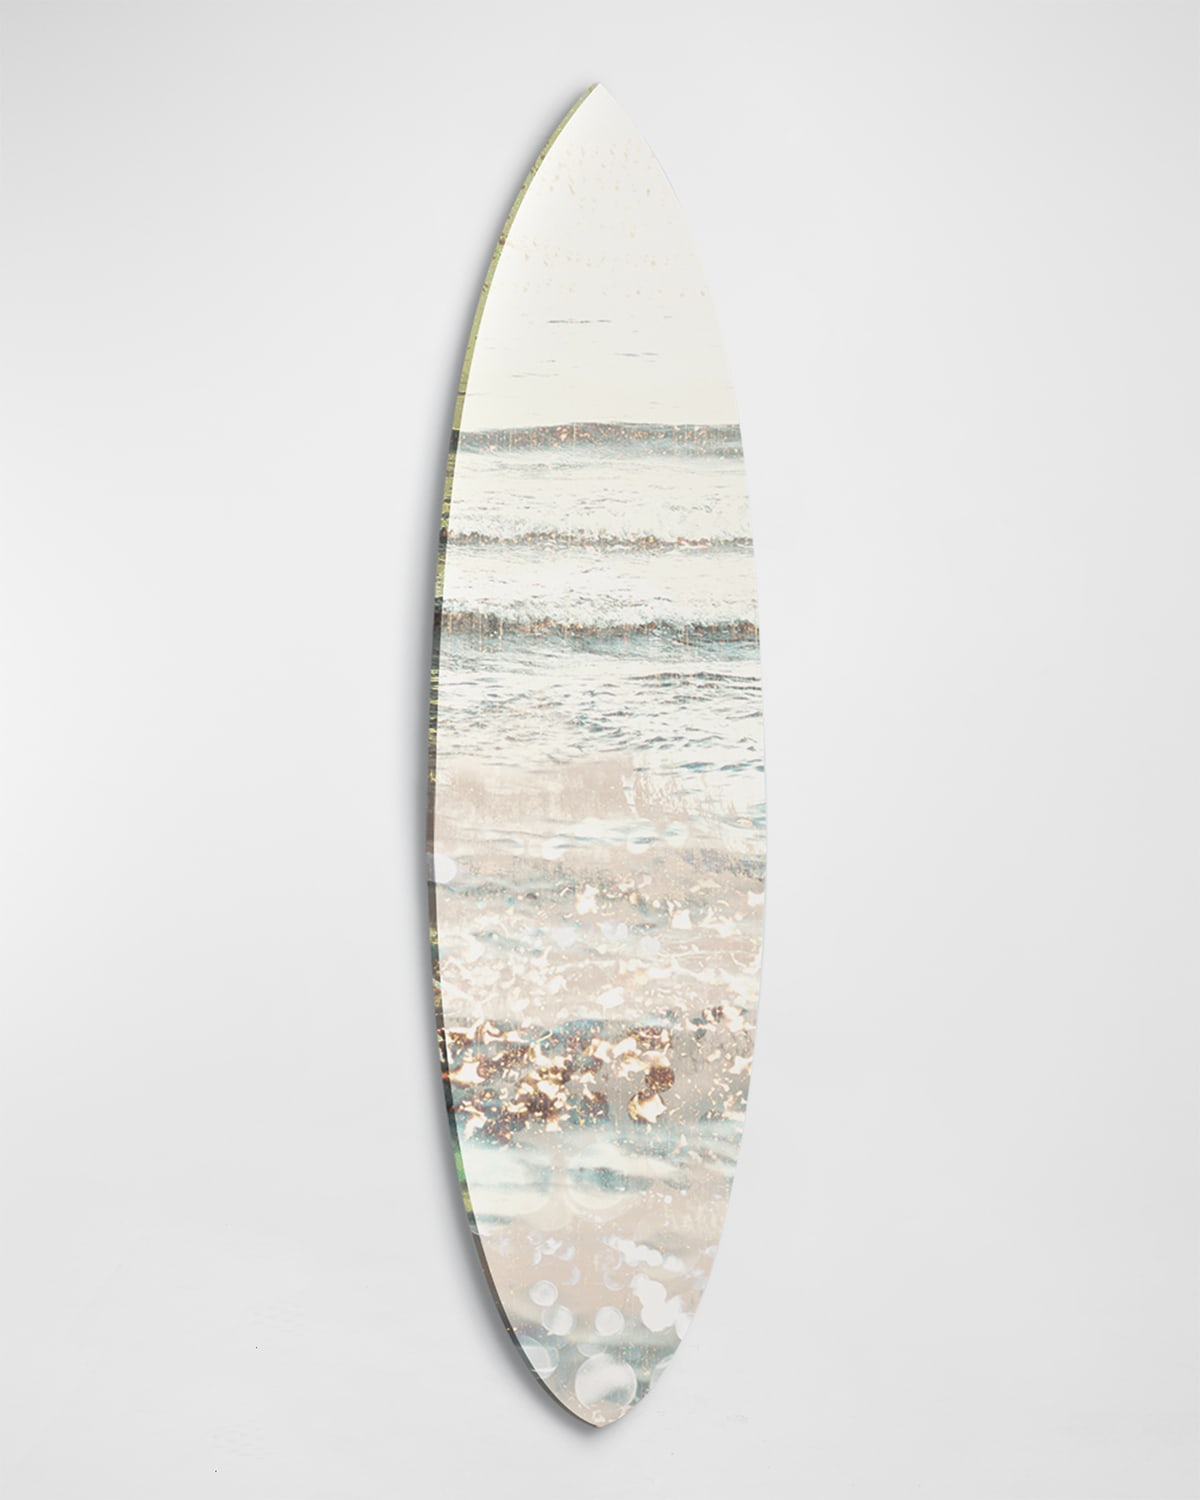 Shop The Oliver Gal Artist Co. Decorative Surfboard Art In Gold